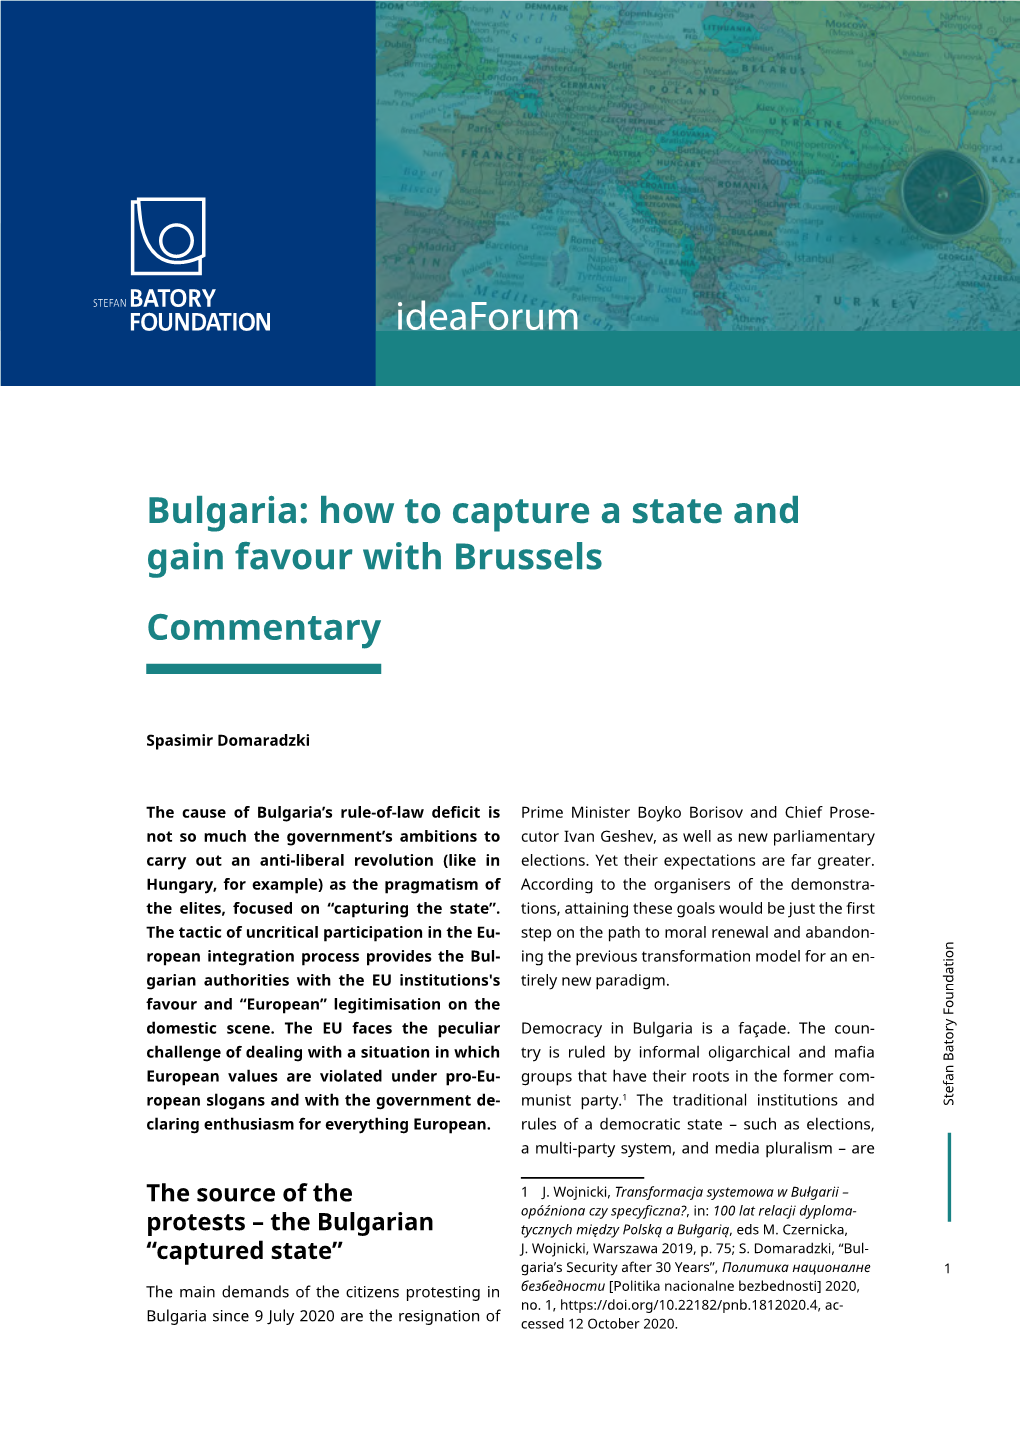 Bulgaria: How to Capture a State and Gain Favour with Brussels